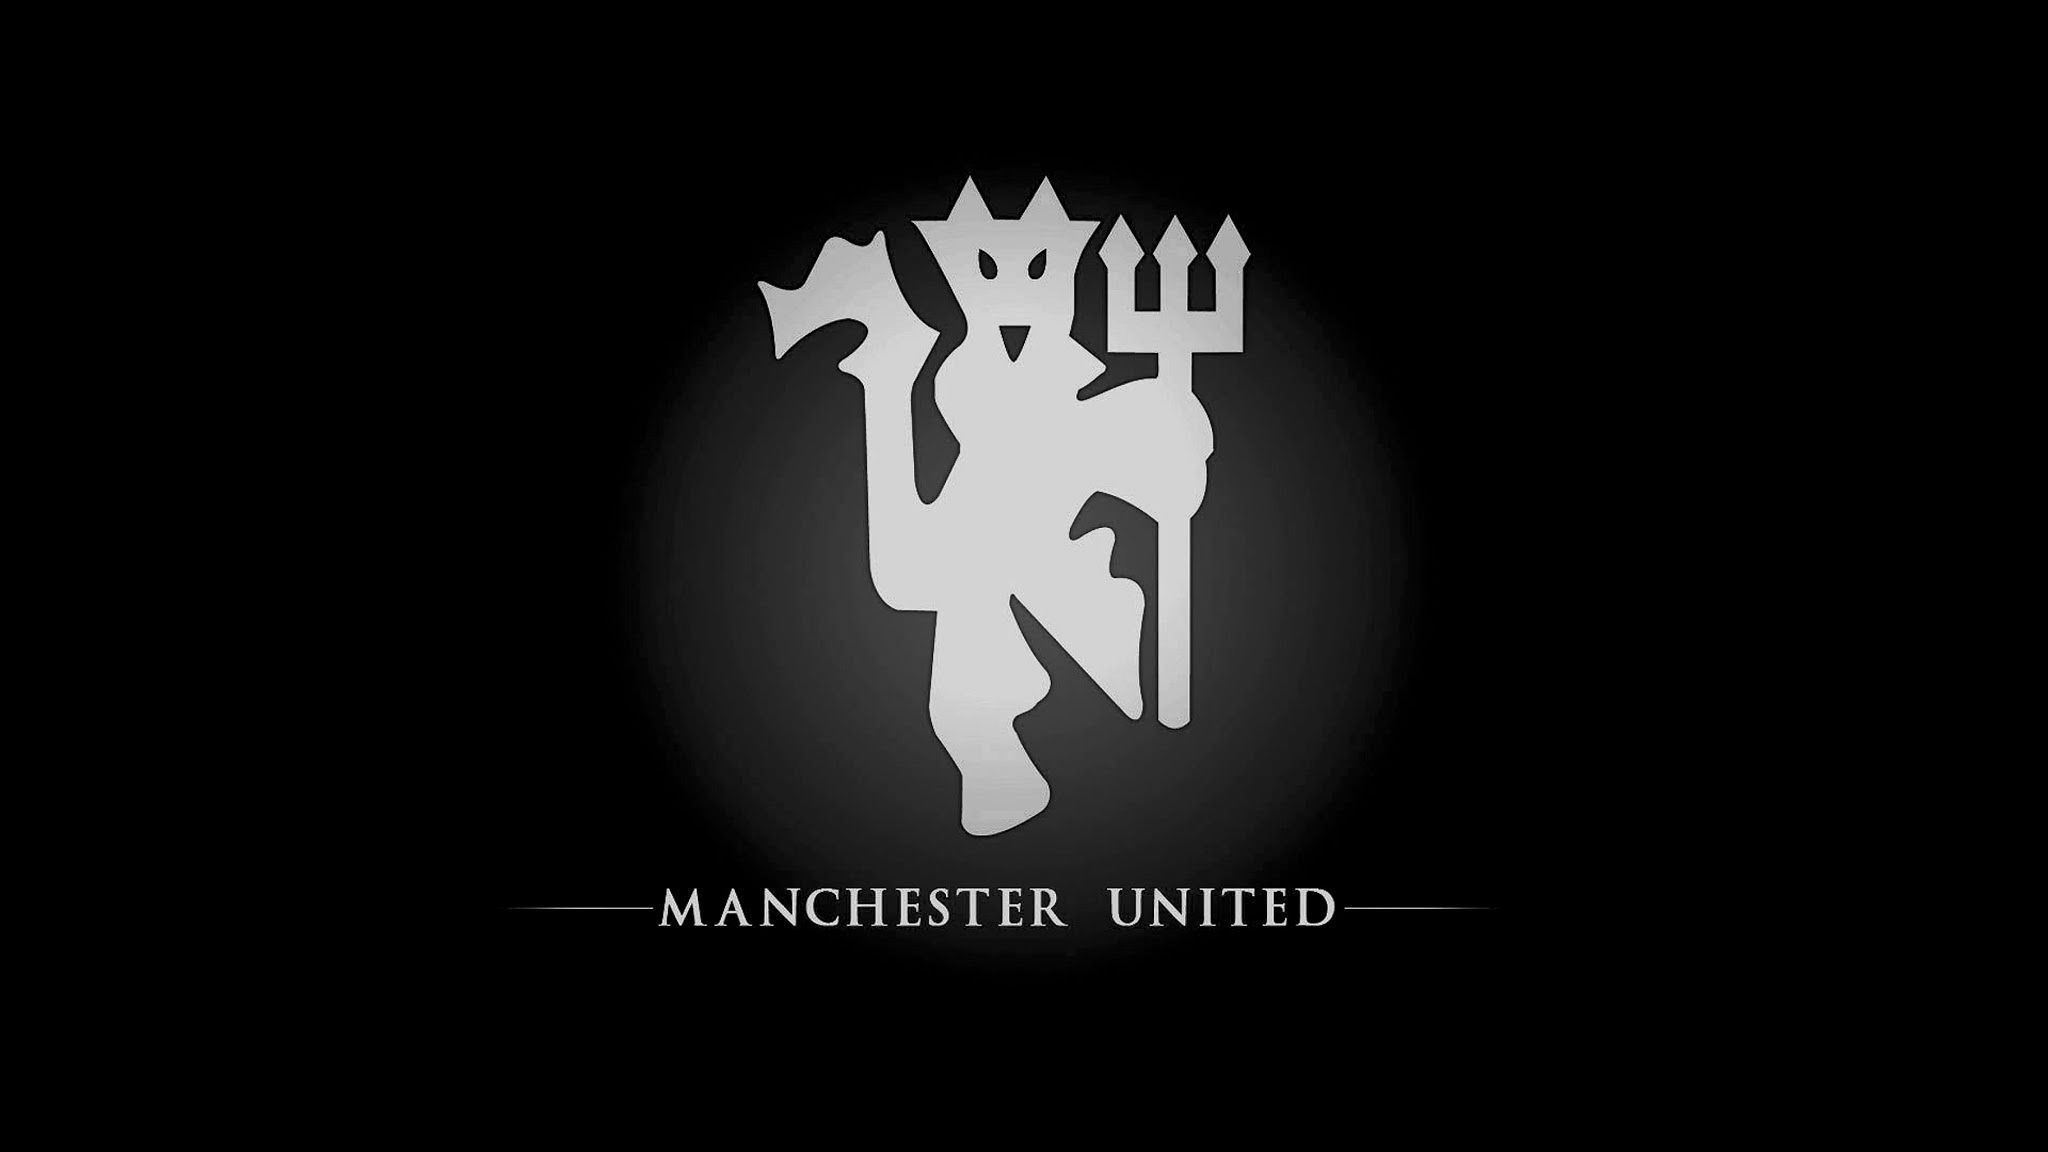 2048x1152 Wallpaper Manchester United (41 Wallpapers)